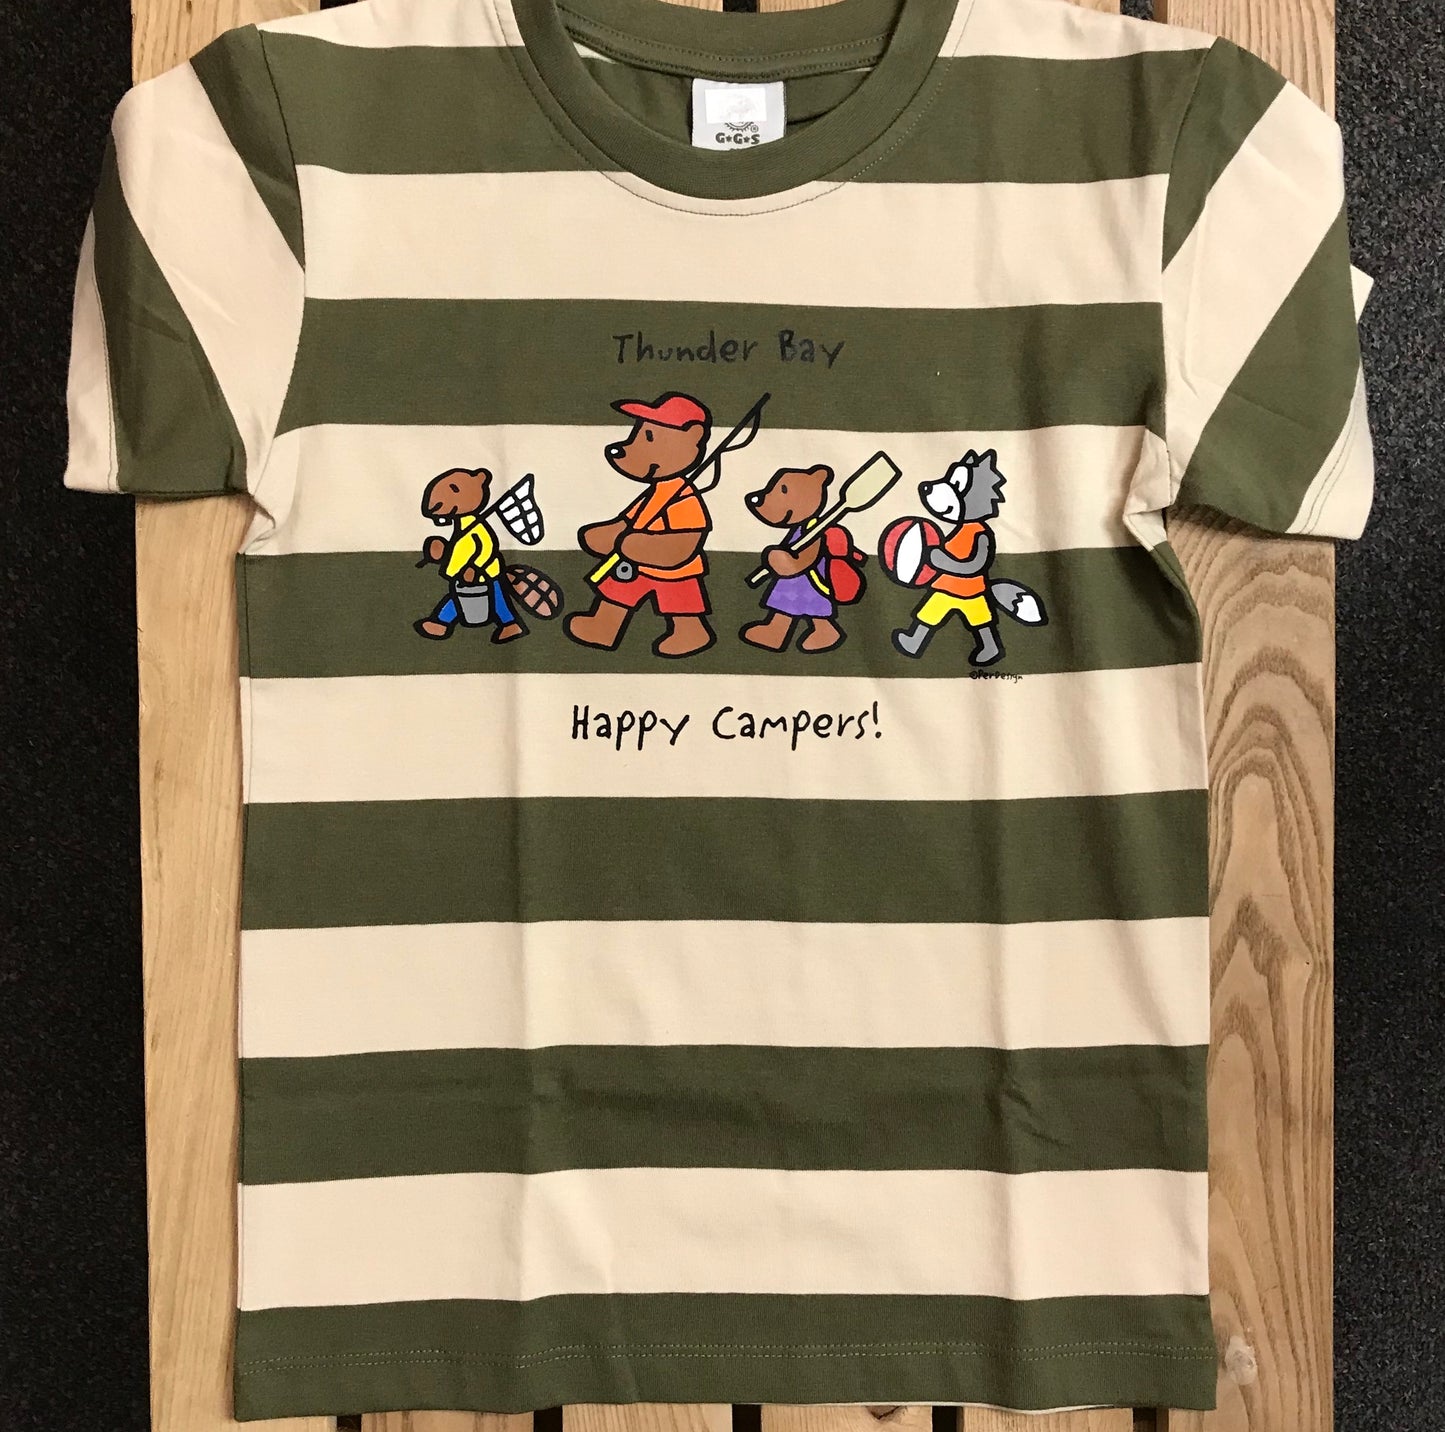 Kid's T-shirt - Thunder Bay, "Happy Campers" - Green Stripes